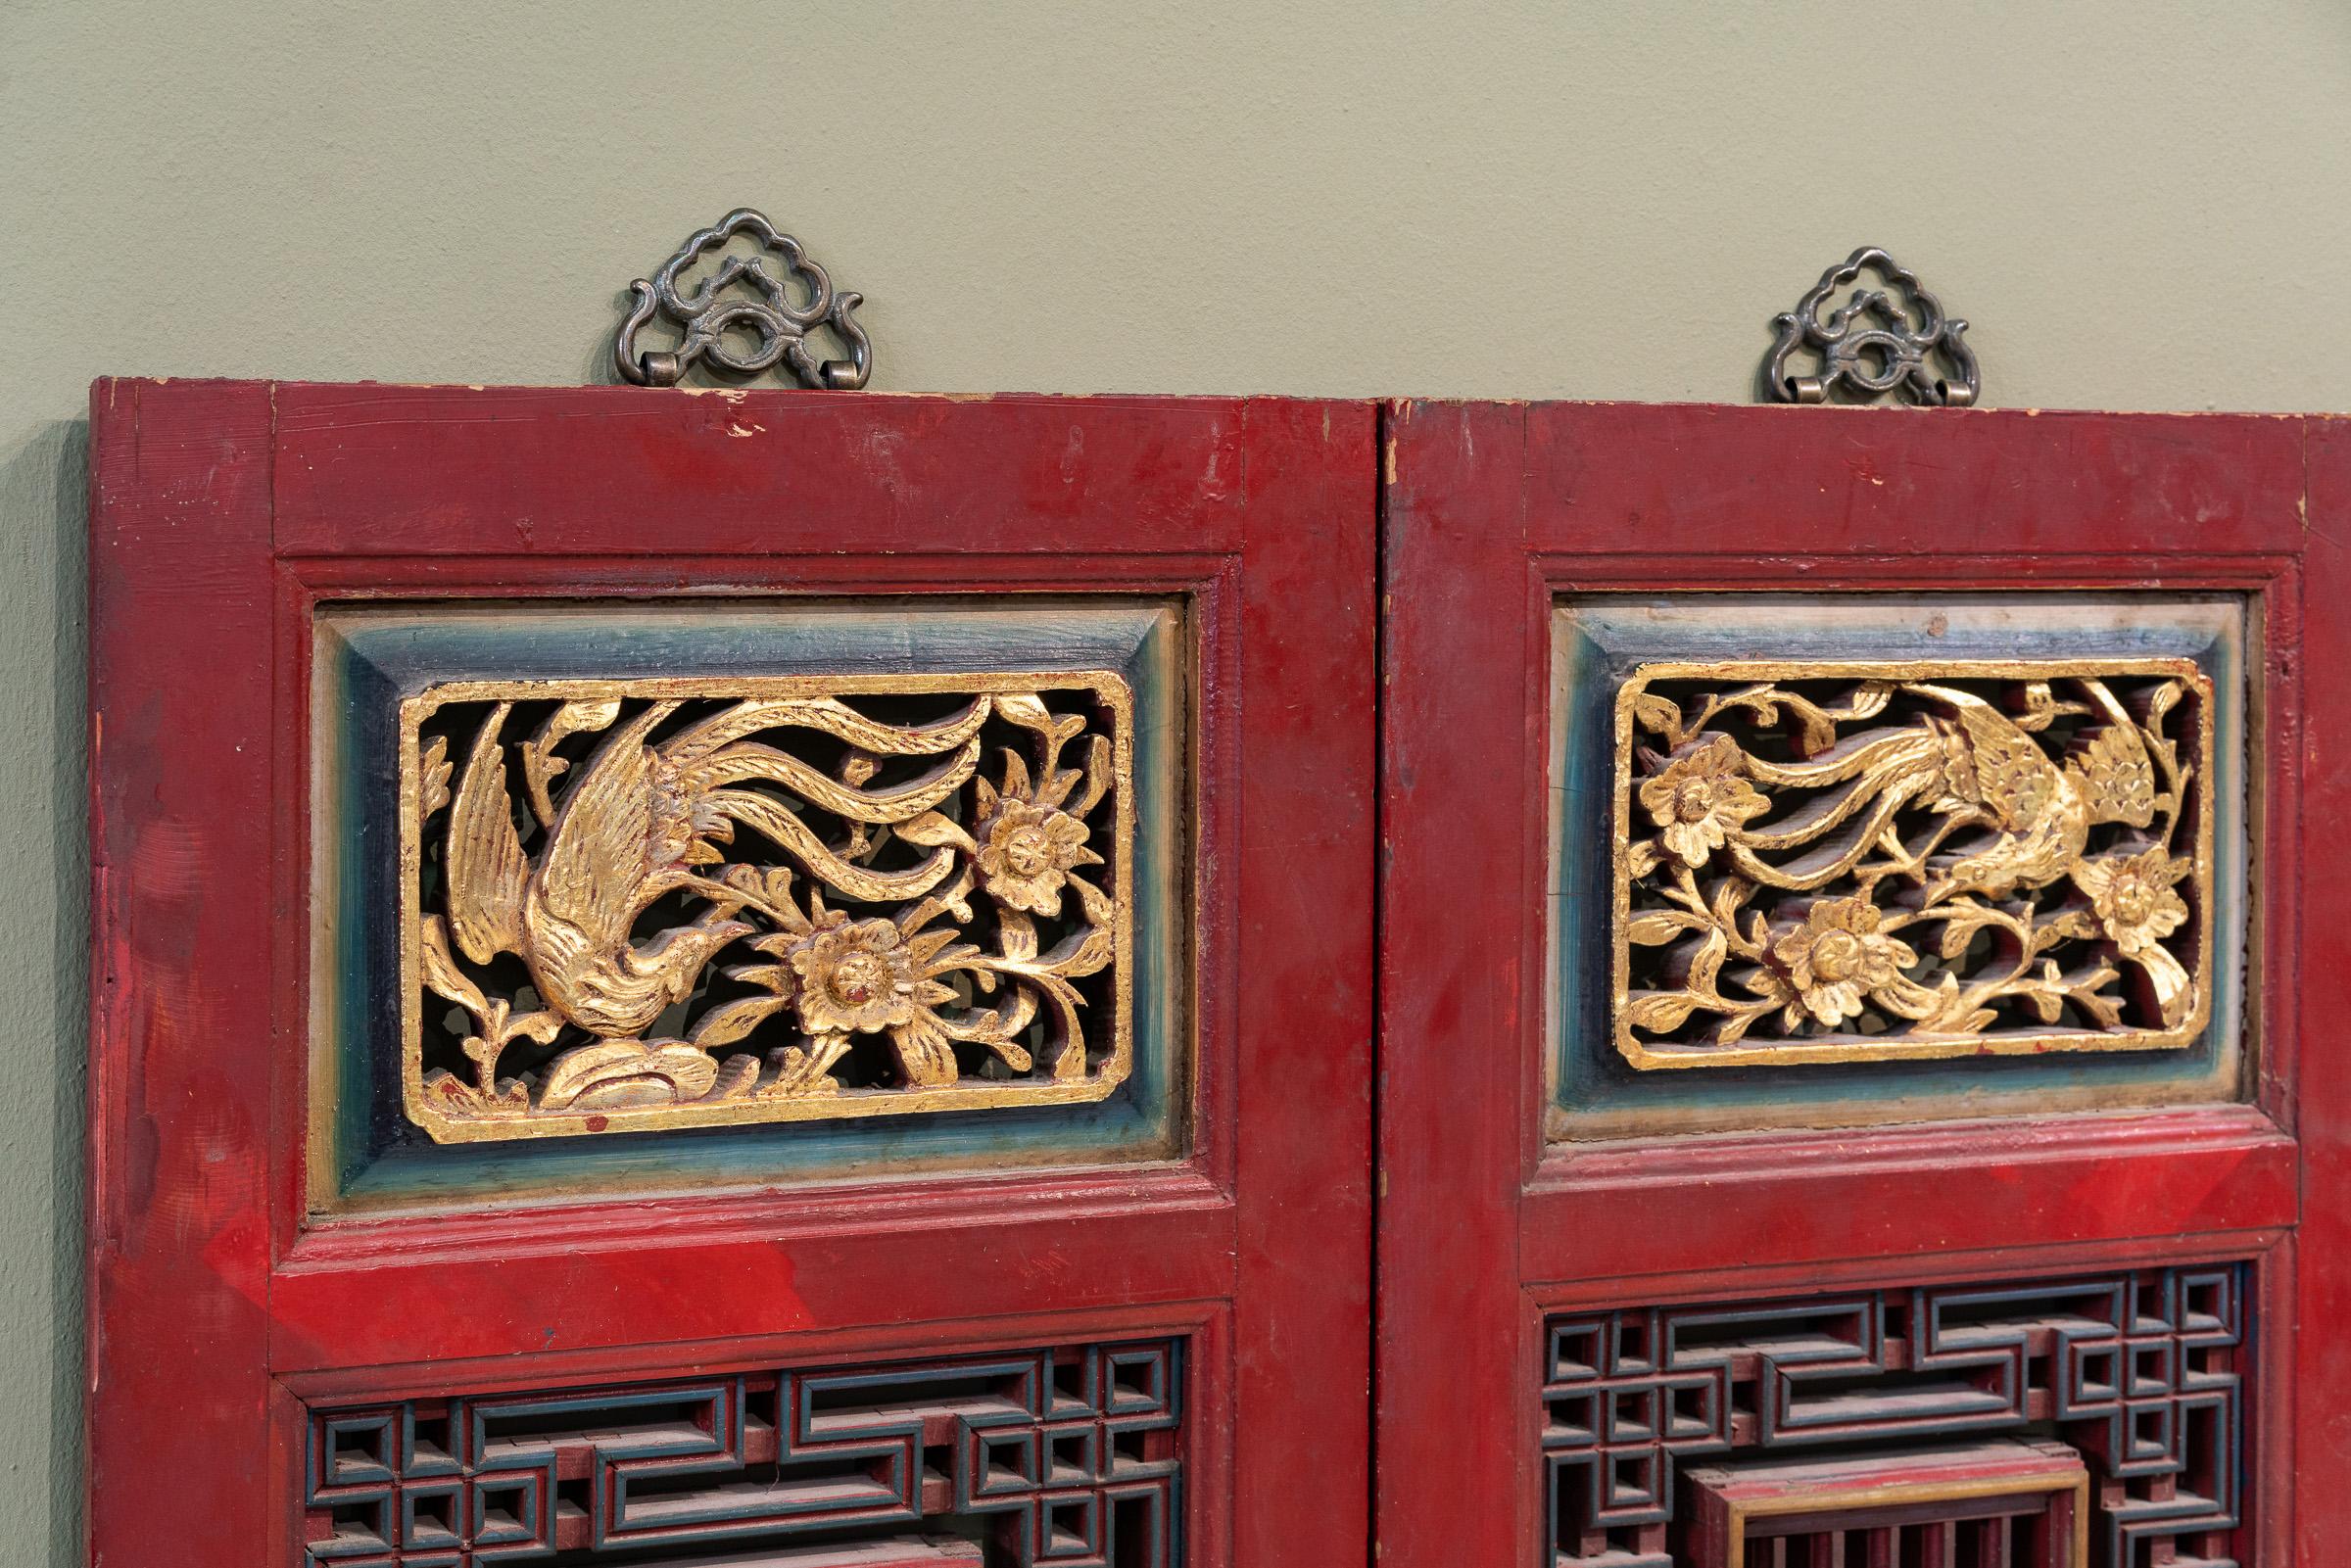 Qing Early 20th Century Window Carvings from Fujian, China